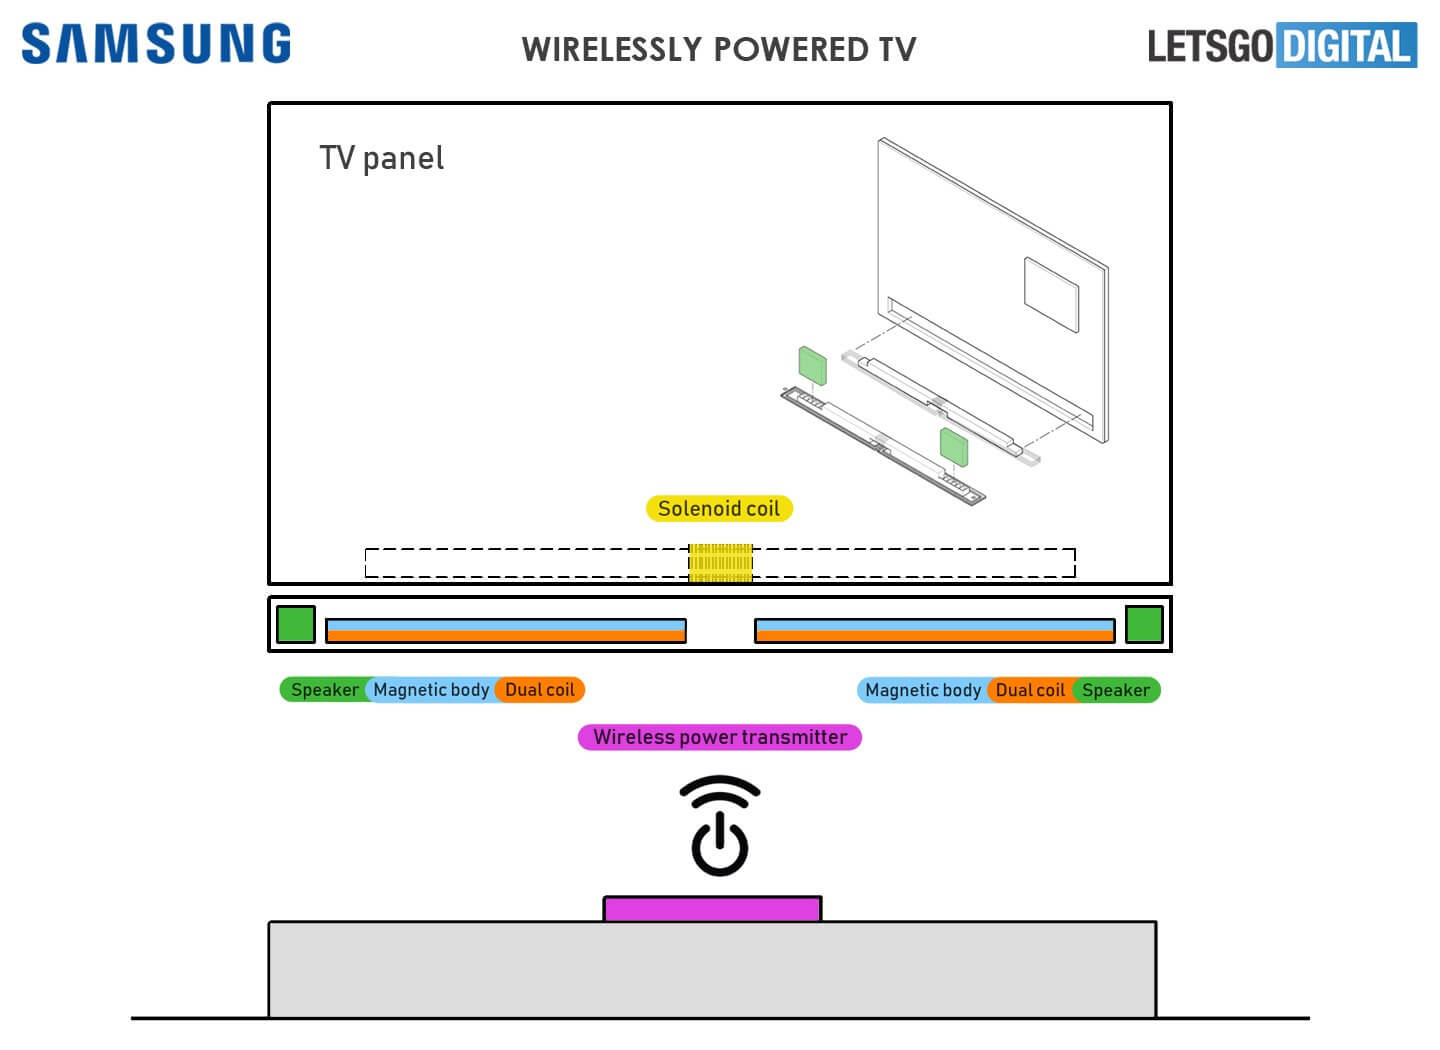 Samsung has just patented a wireless TV